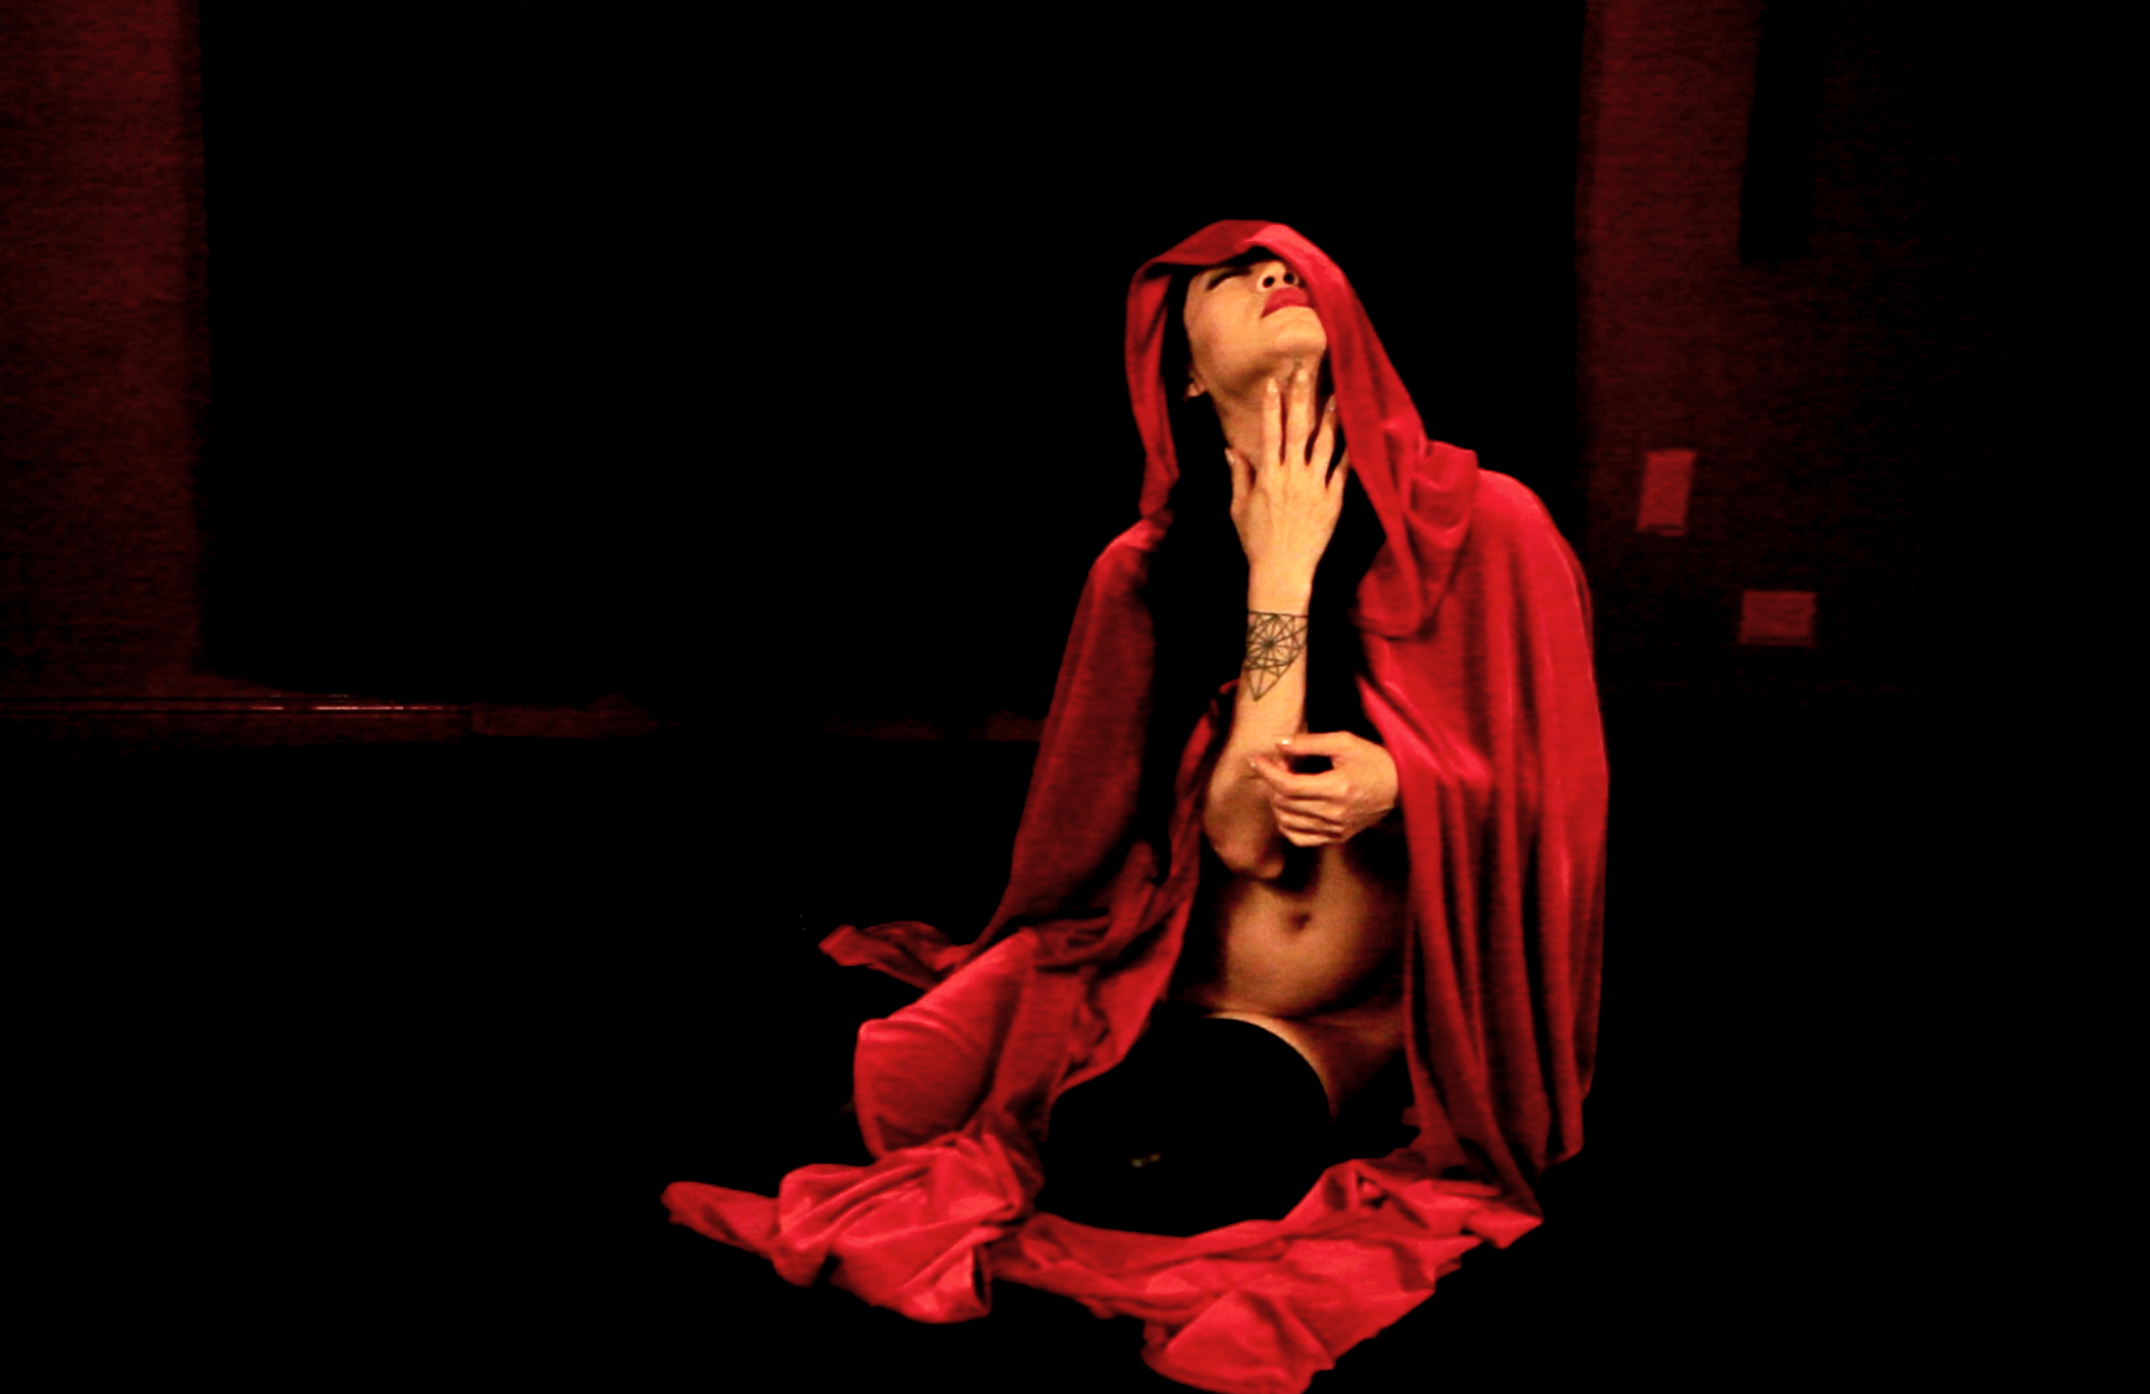 a person against a black background seated and draped in red fabric